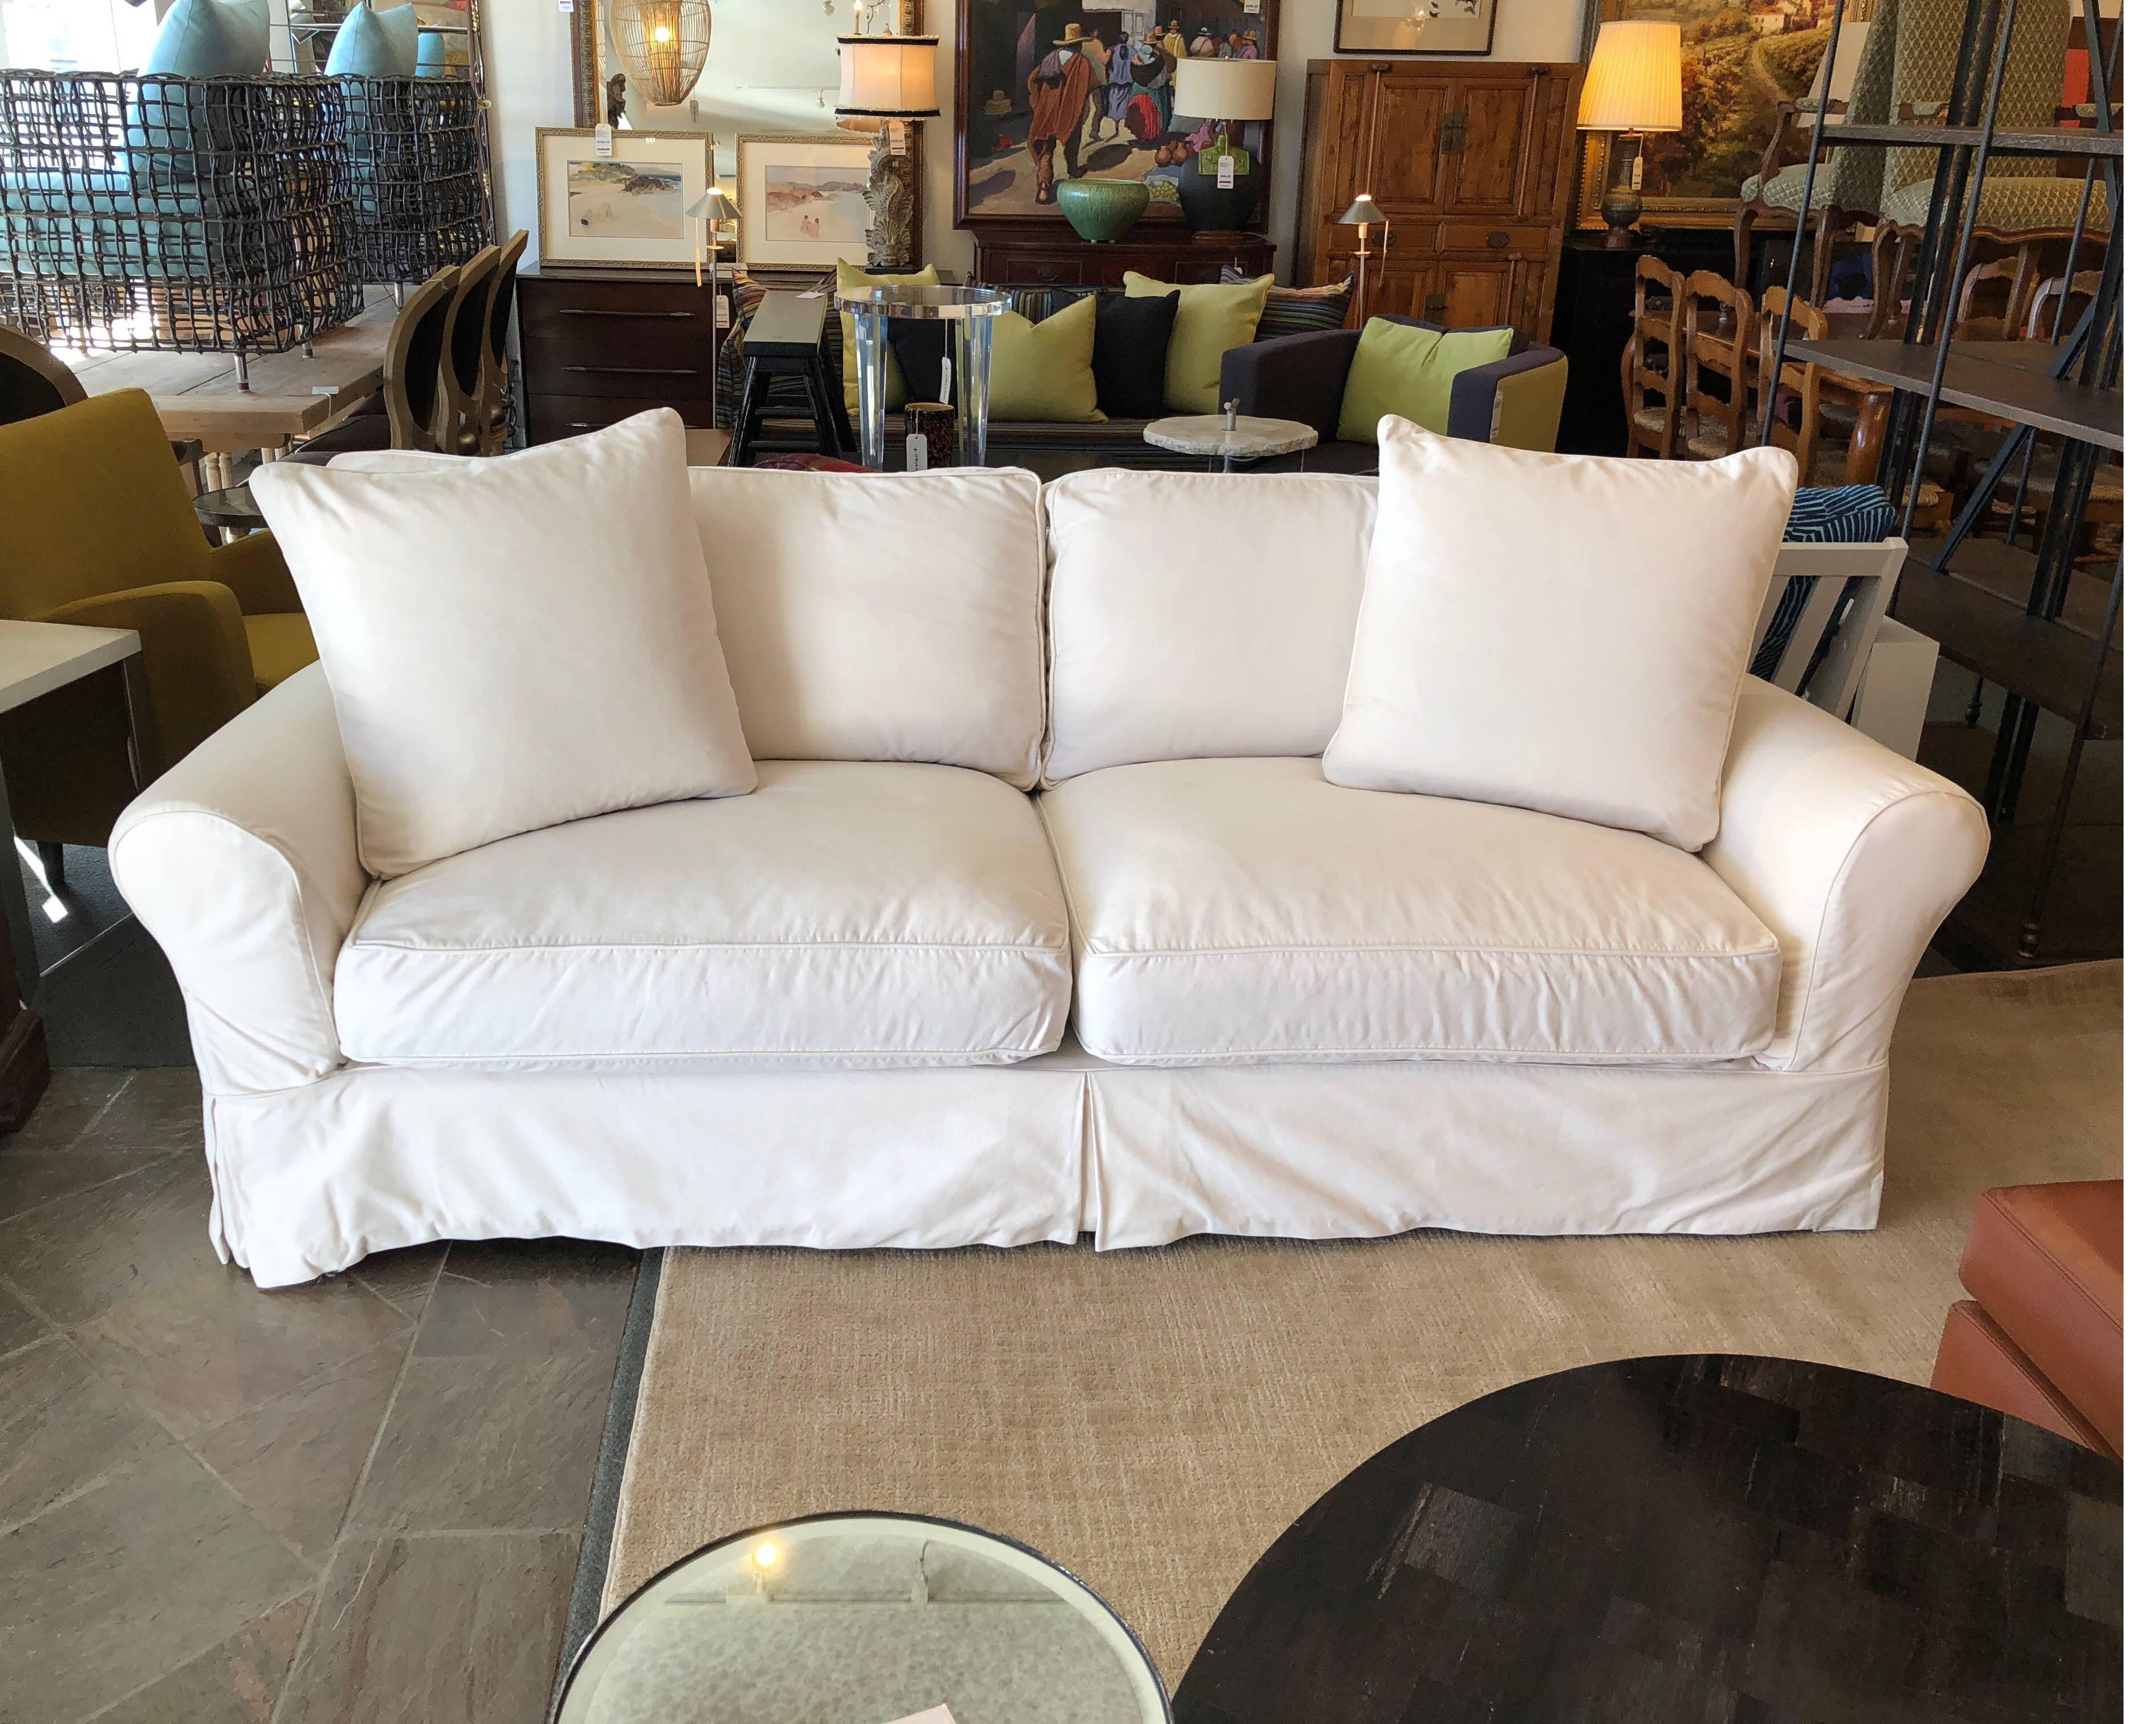 A grand scale sofa from restoration hardware. Each piece of the seating is roomy and comfy, featuring deep seats and supportive down wrapped cushions. The frame is kiln-dried hardwood with eight-way, hand-tied spring suspension and mortise-and-tenon